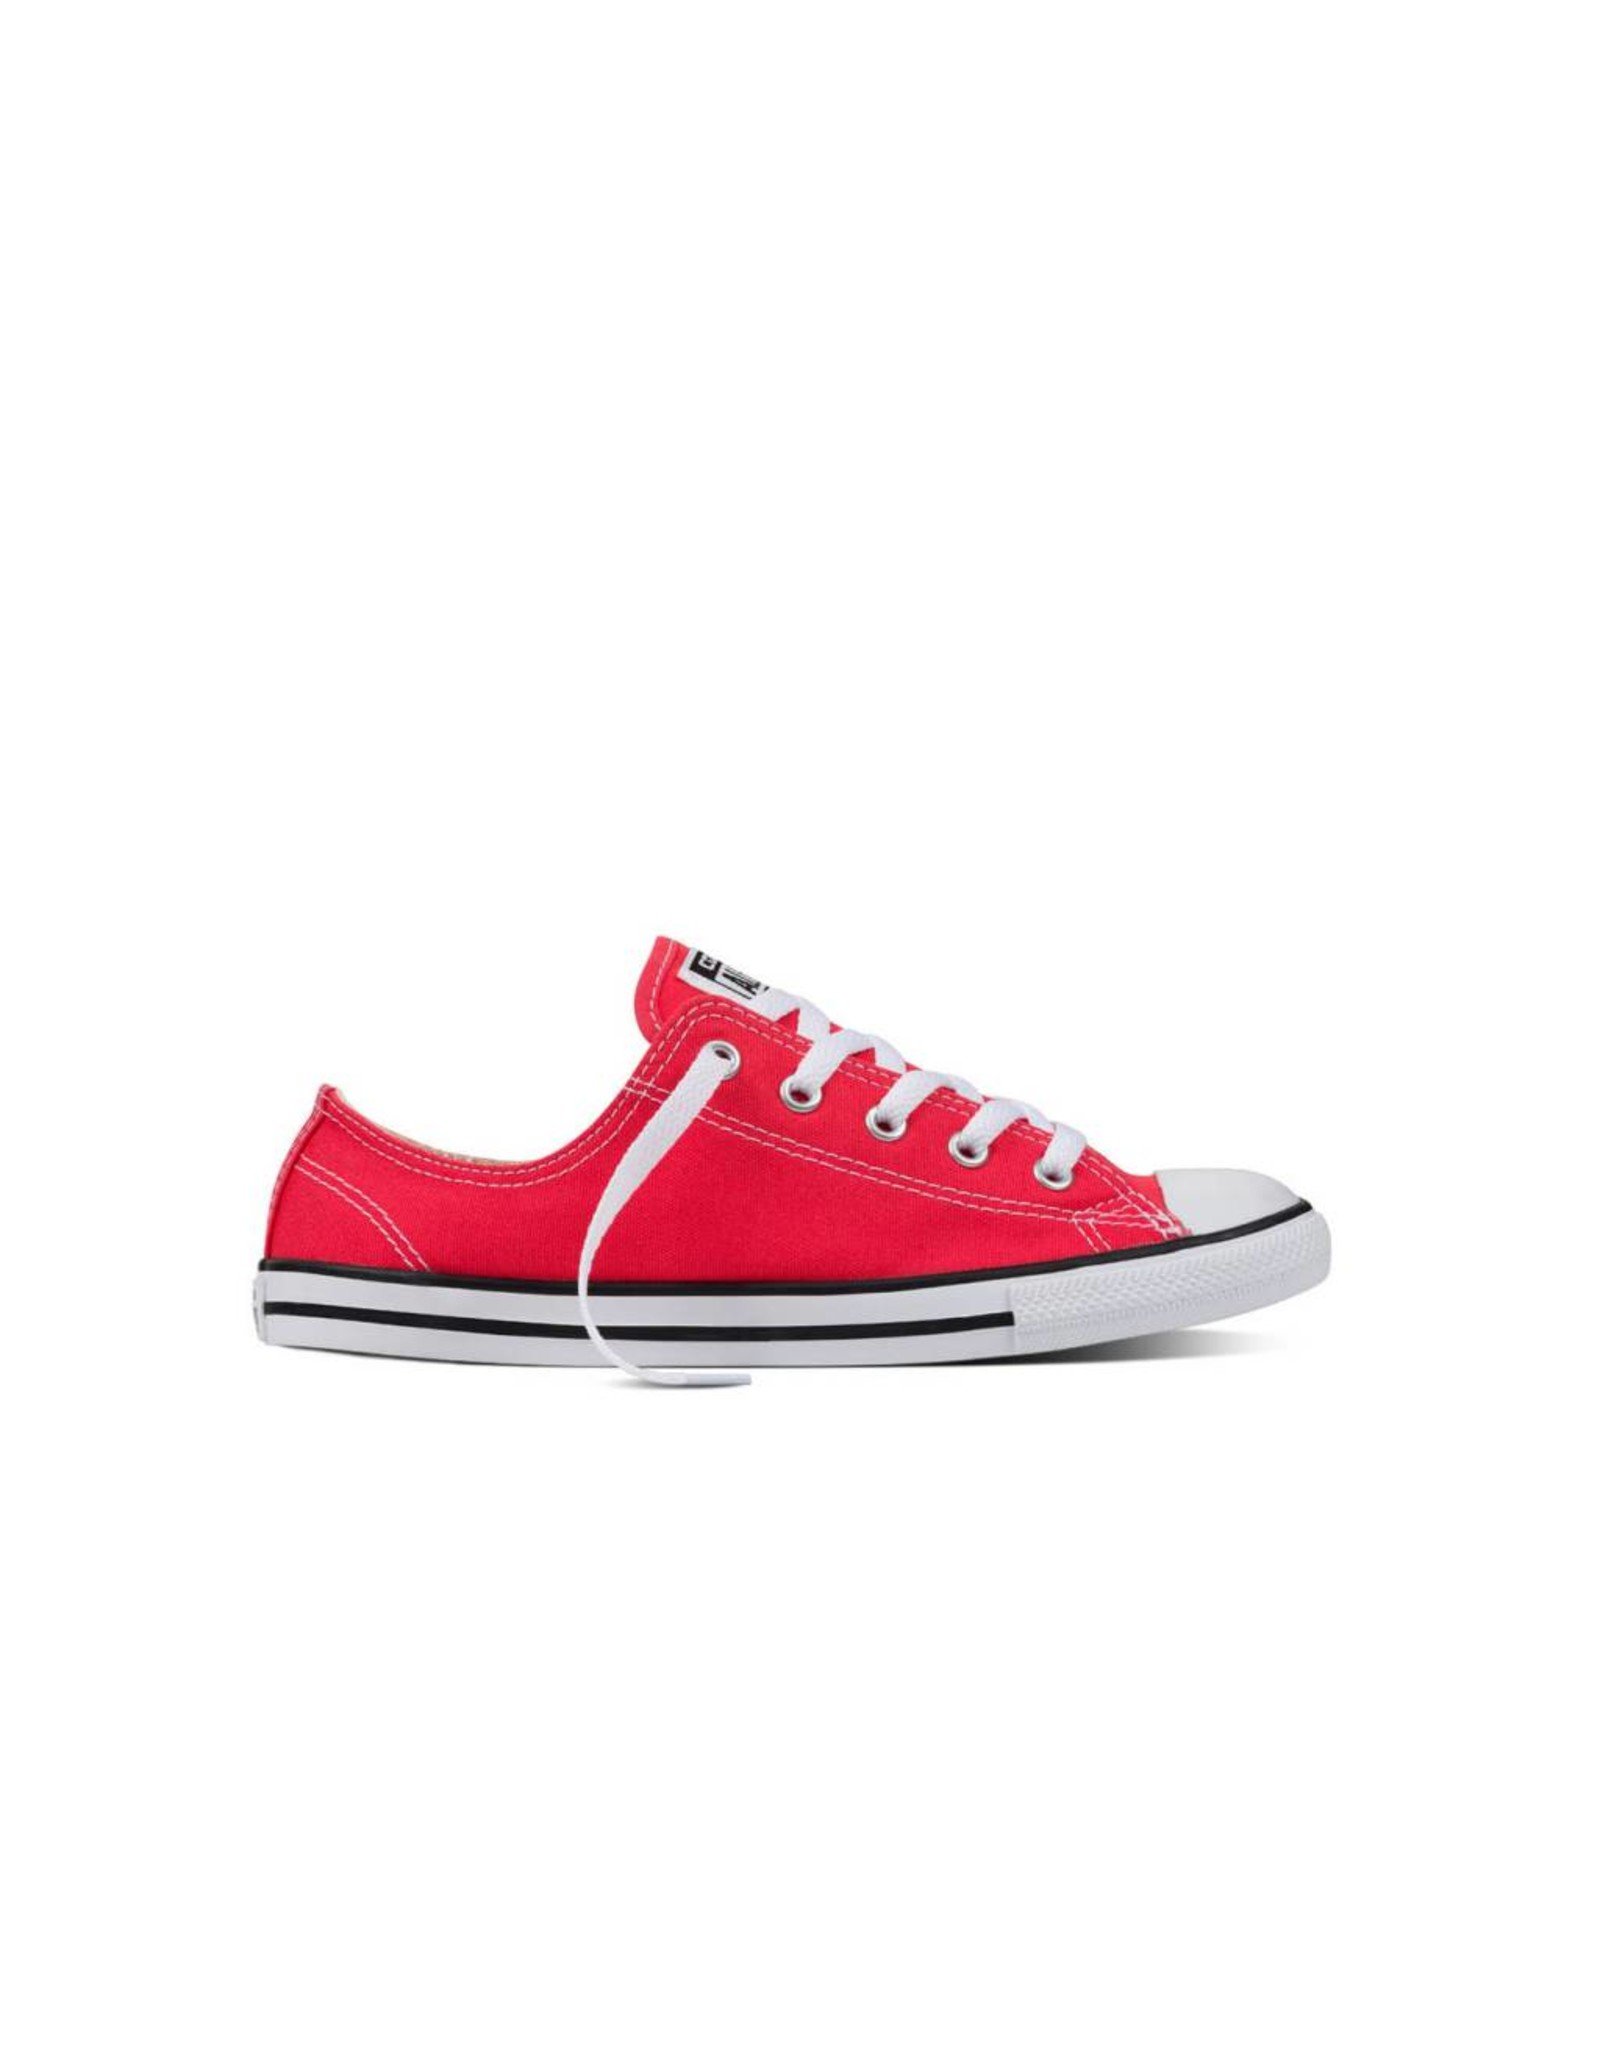 CONVERSE CHUCK TAYLOR DAINTY OX ULTRA RED/BLACK/WHITE C740DUR-555987C